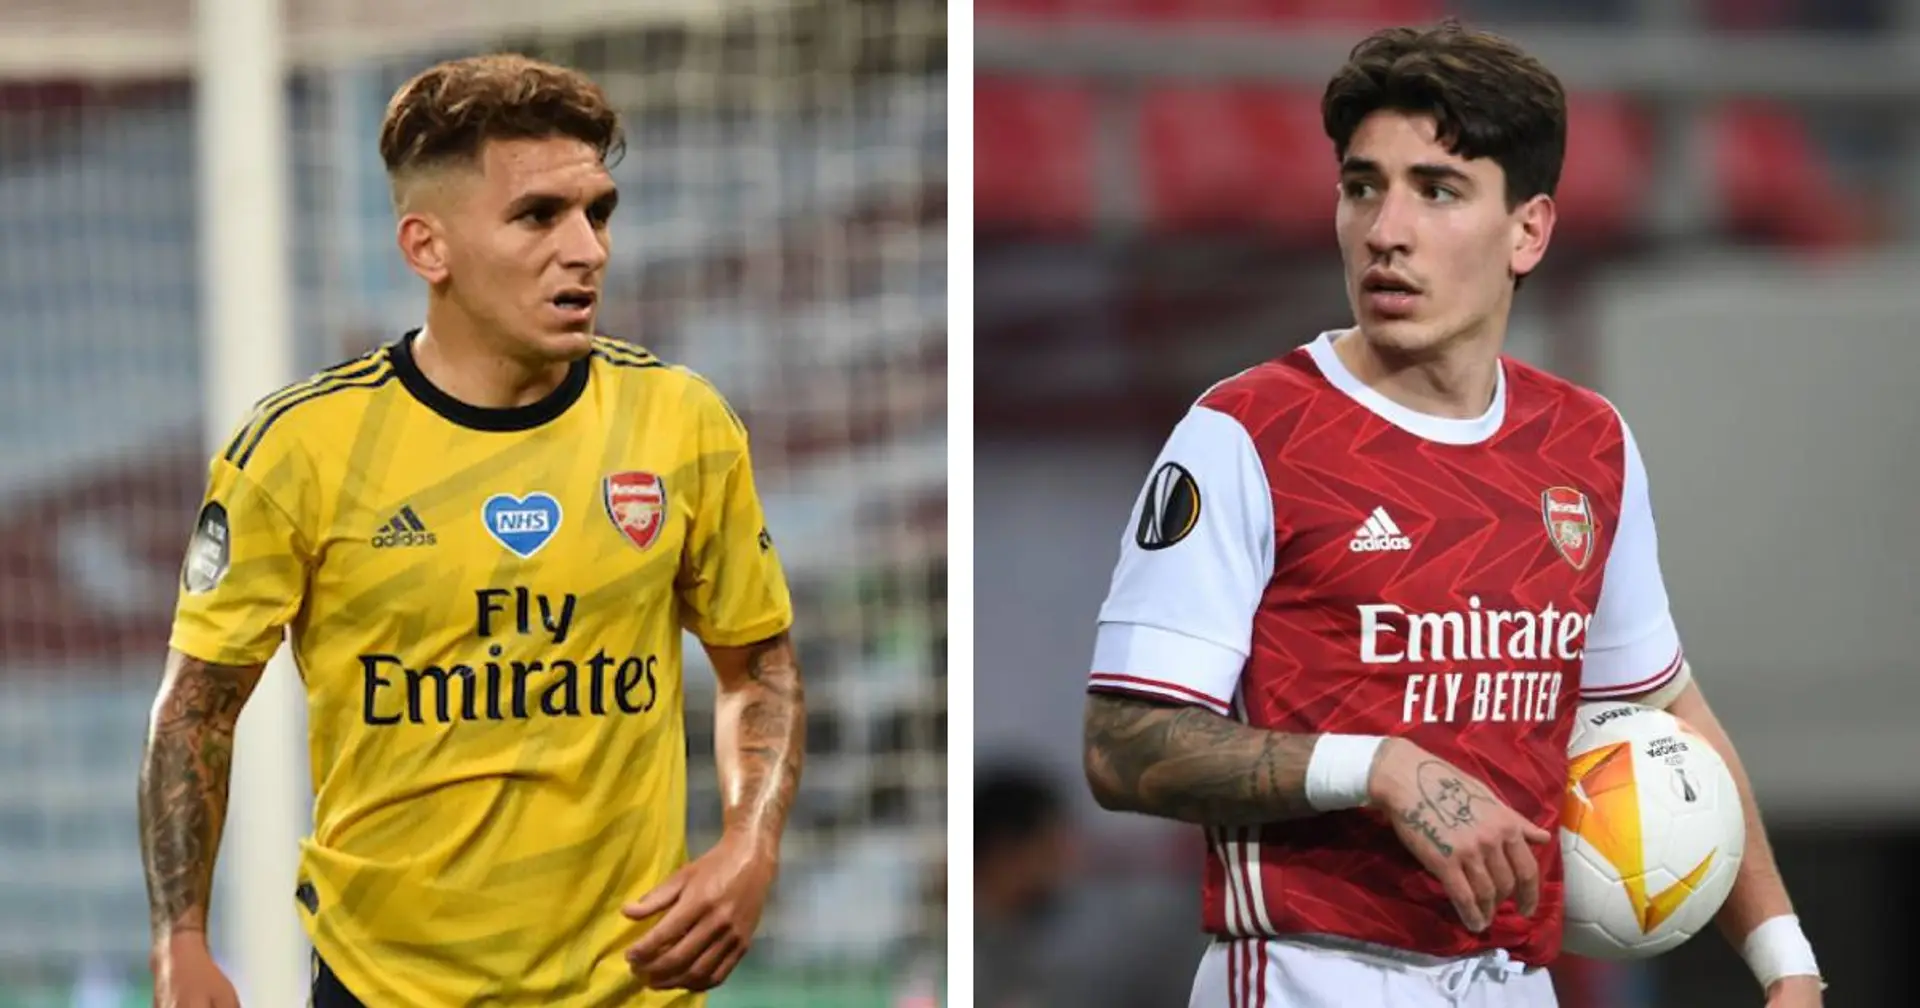 Bellerin & Torreira expected to leave club, Arsenal will look for a new right-back (reliability: 5 stars)